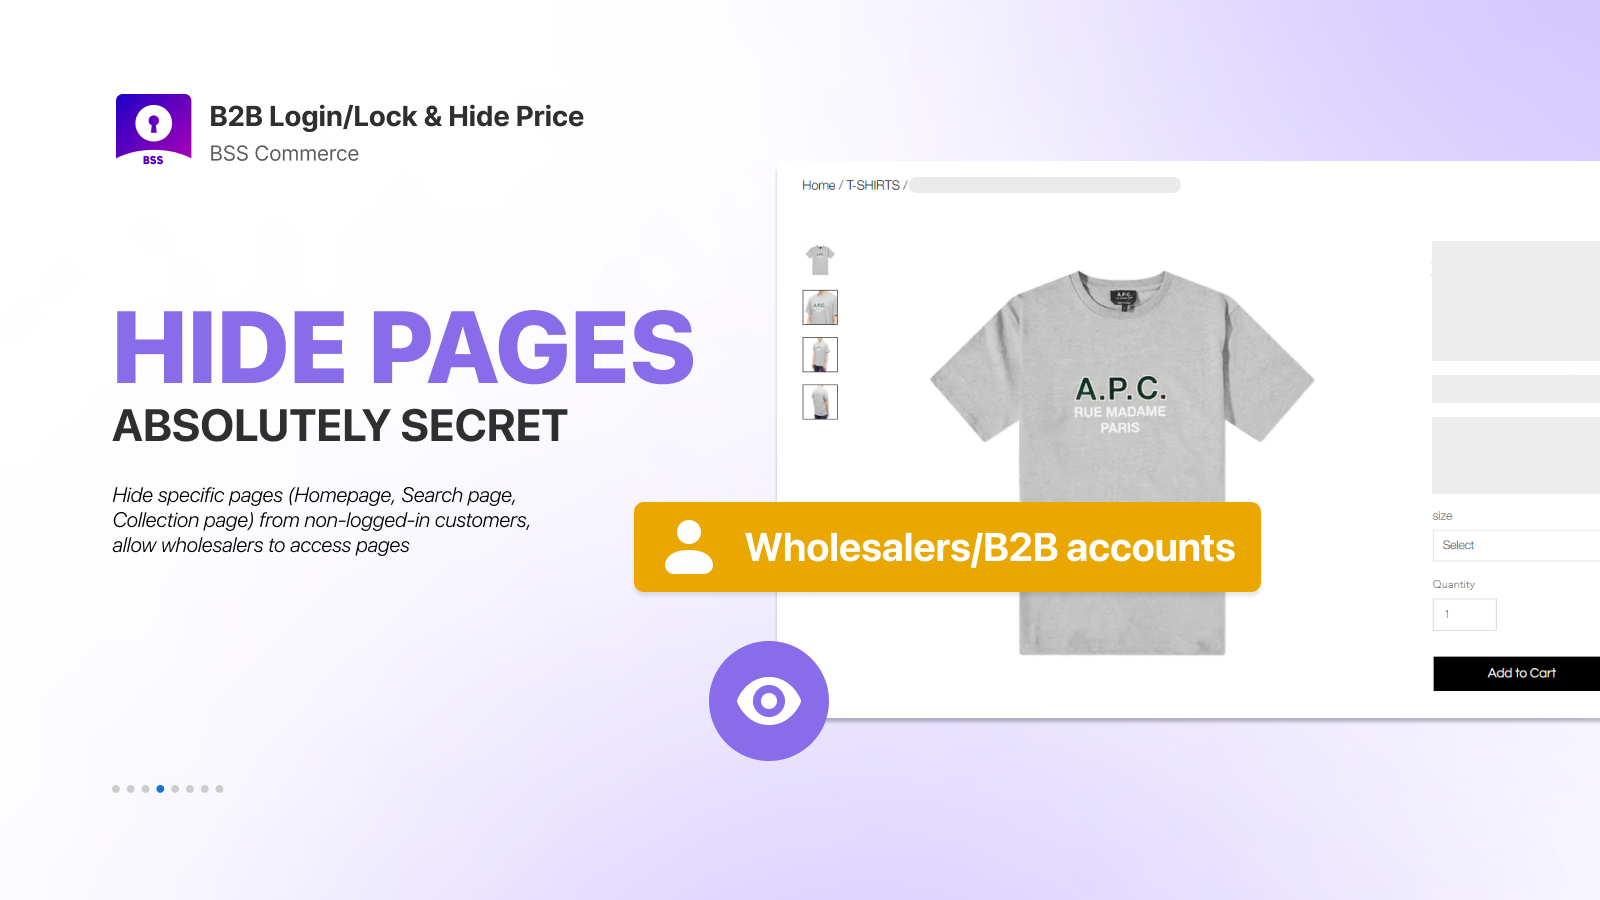 Hide Pages, Allow Only Wholesalers Access